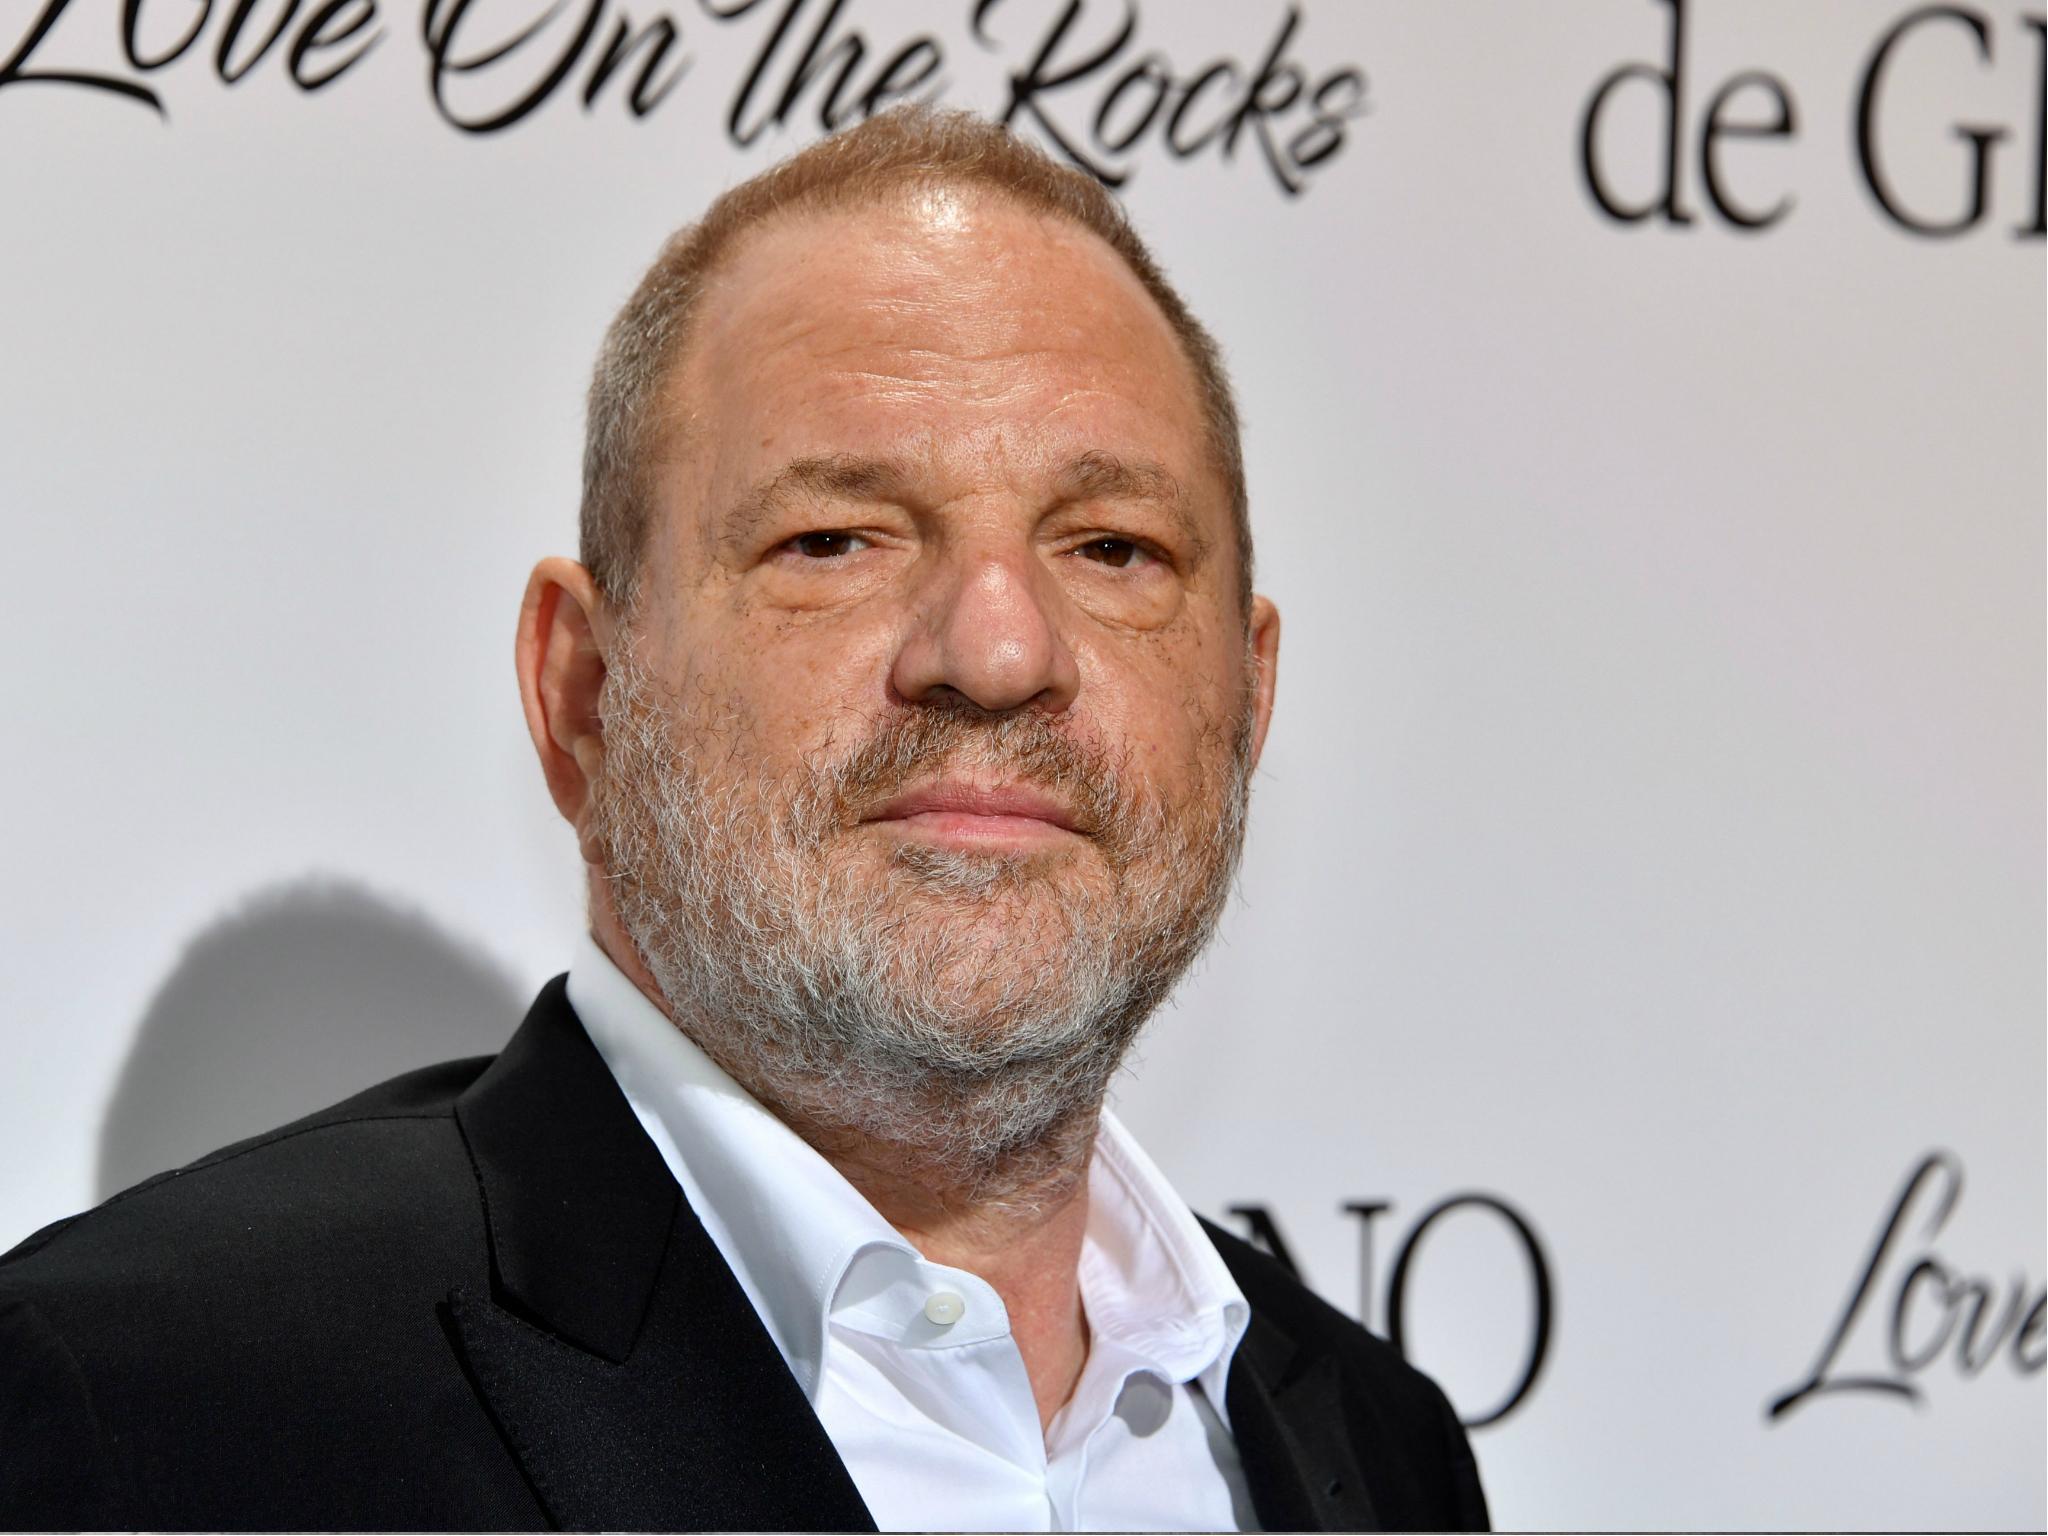 Harvey Weinstein has denied having non-consensual sex with anyone